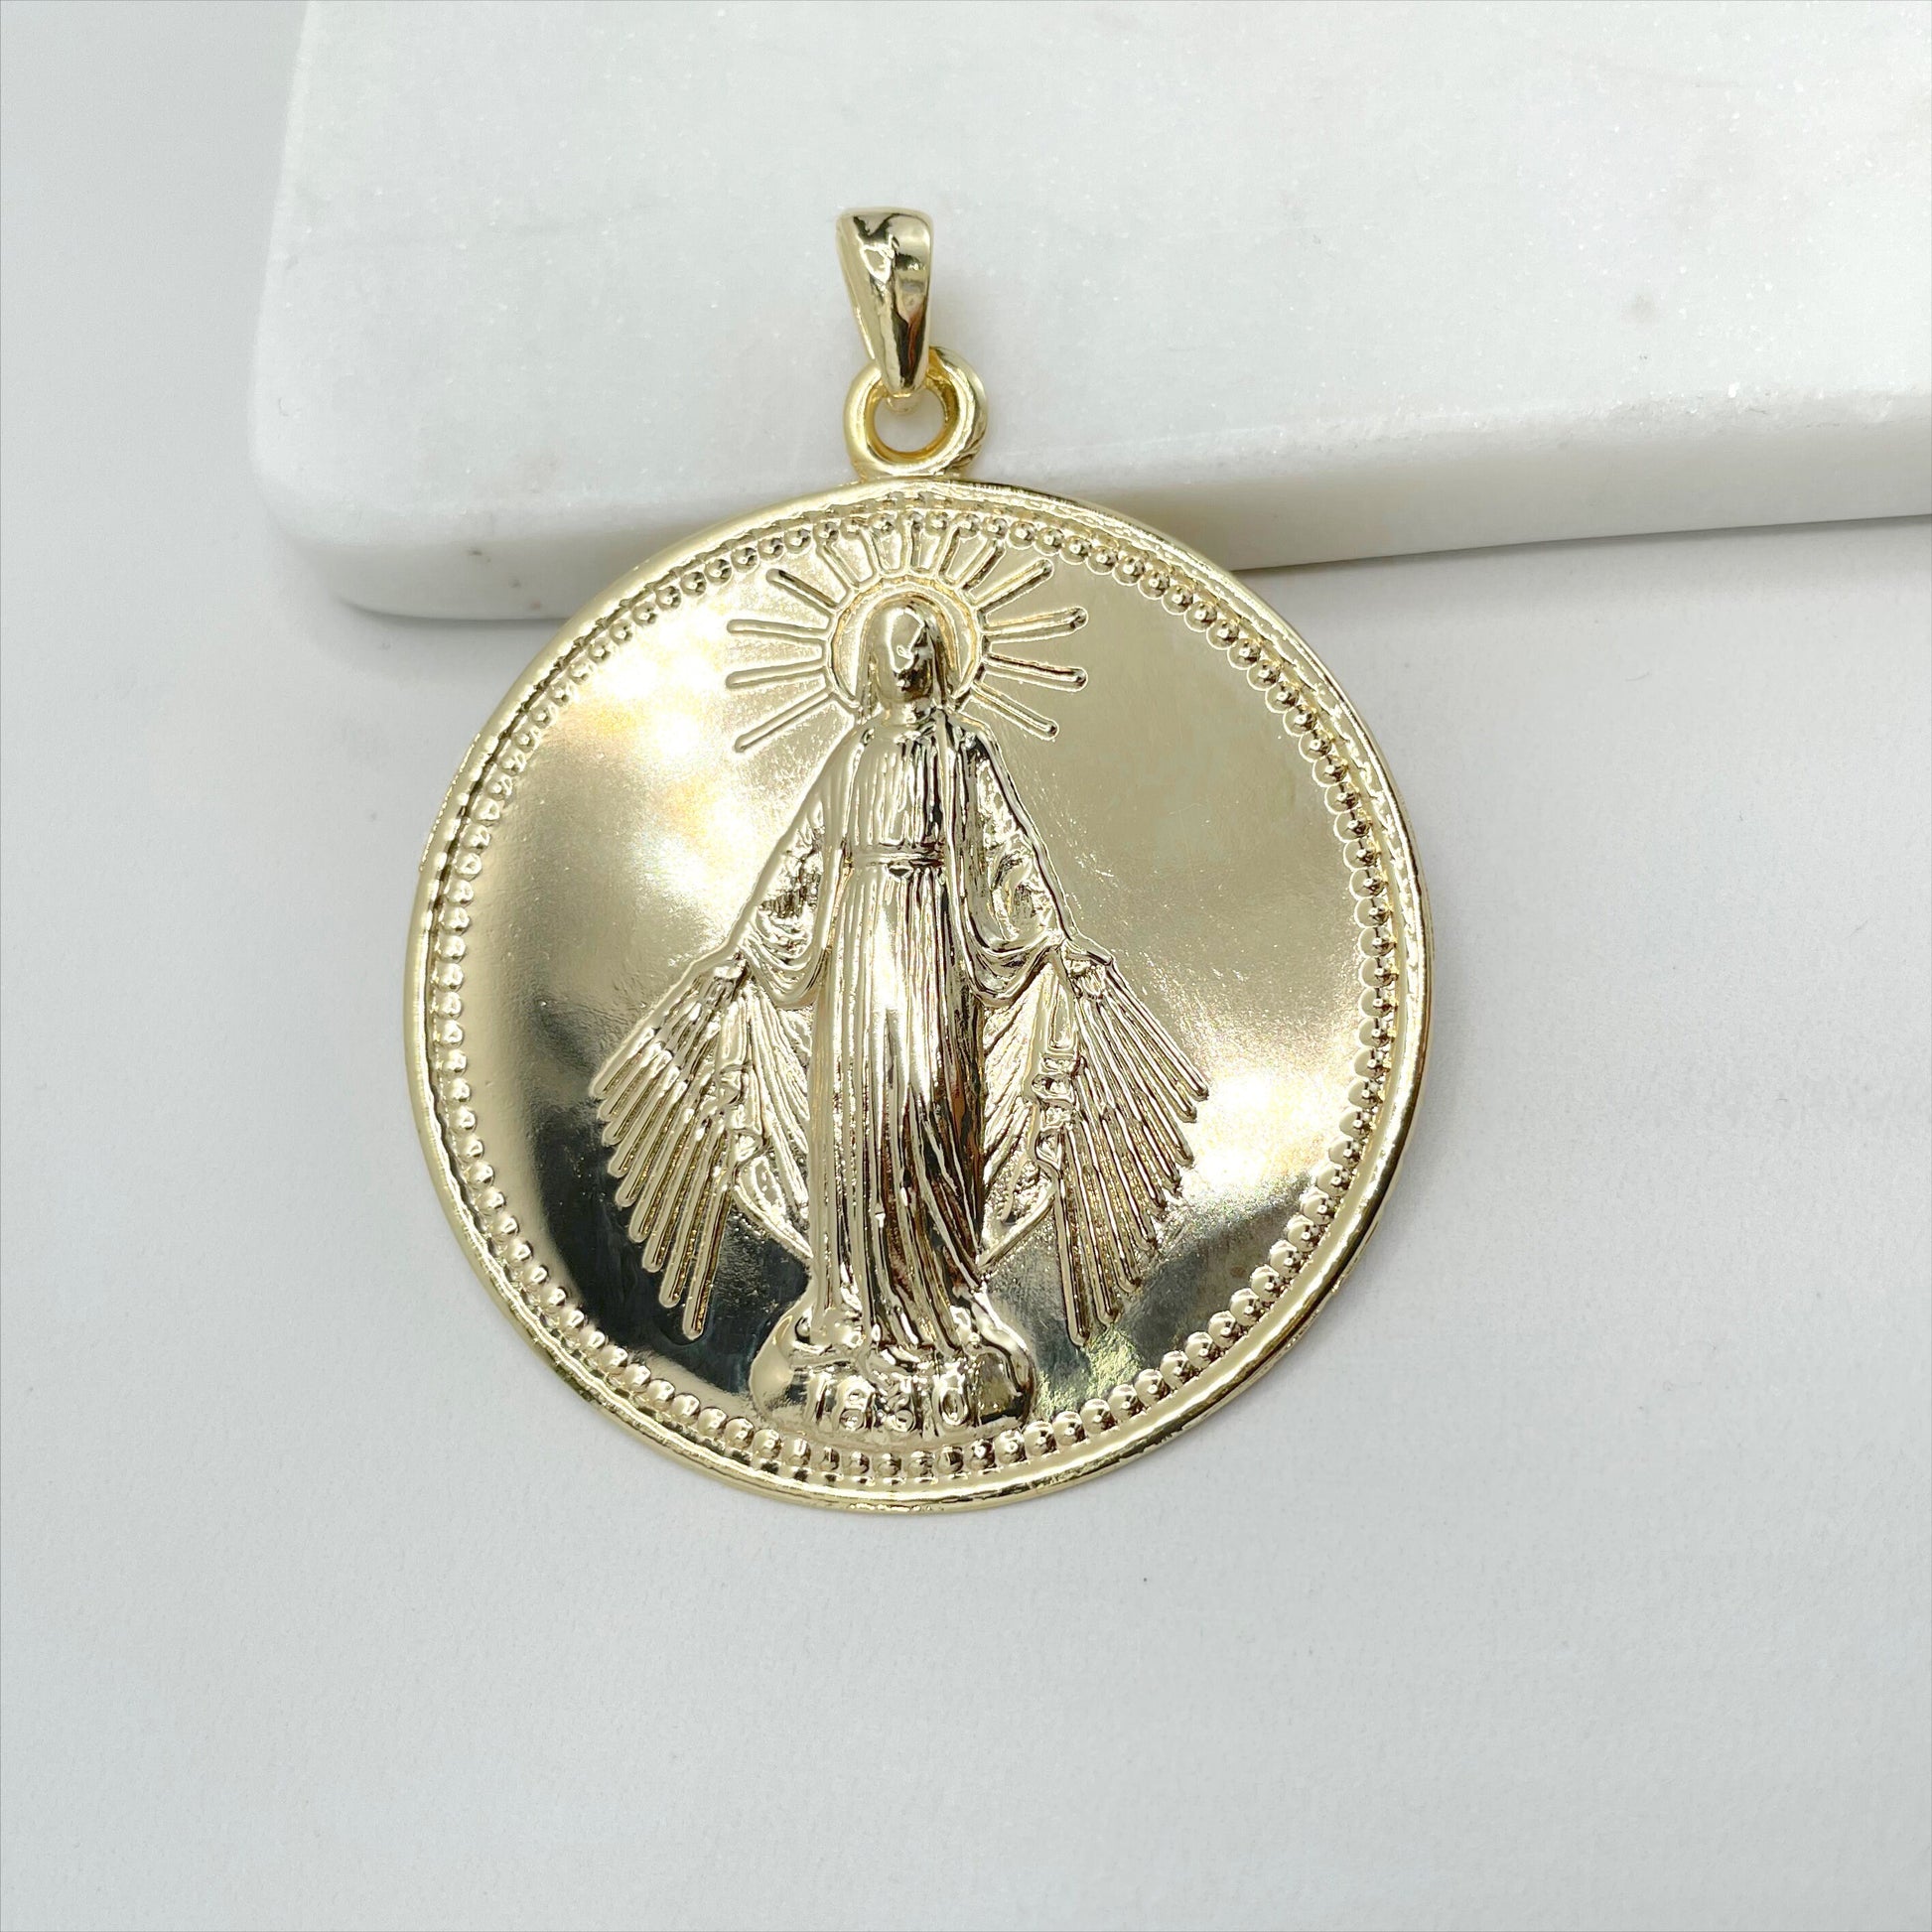 18k Gold Filled La Milagrosa, Miraculous Virgin Round Medal Pendant Charms, Religious Jewelry, Wholesale Jewelry Making Supplies